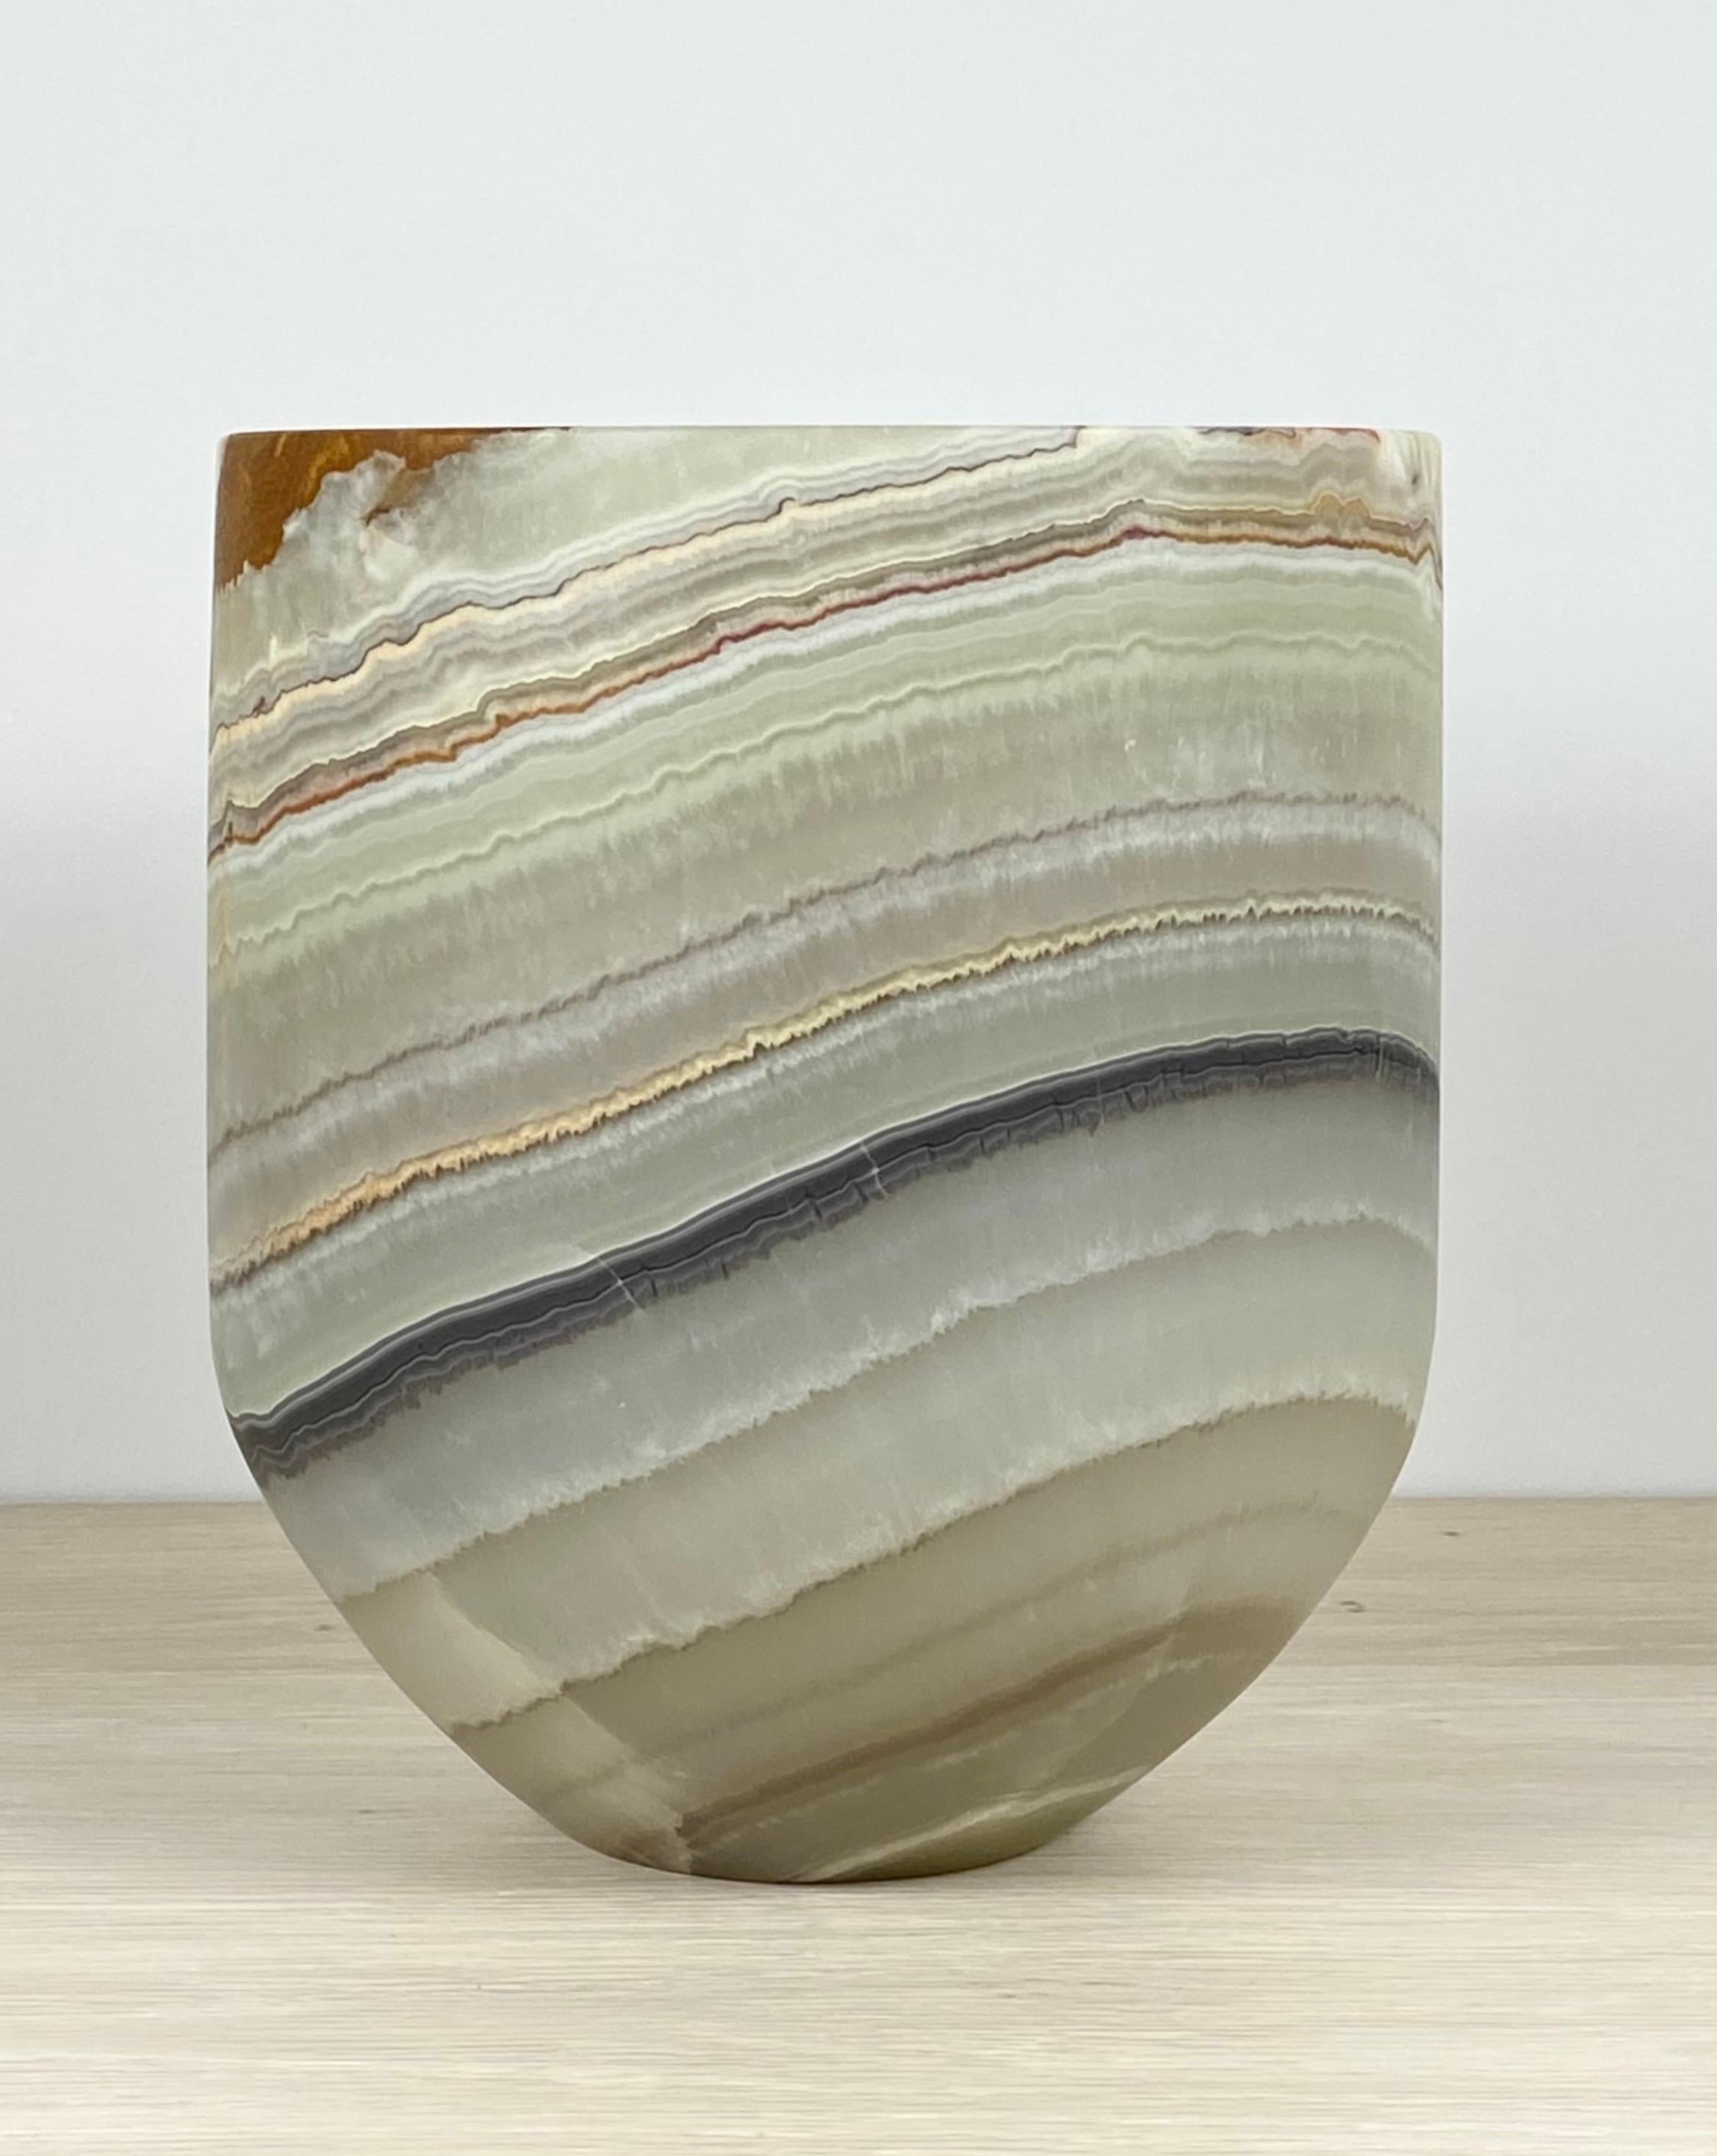 A stunning onyx planter with a polished edge. This one of a kind planter is carved from a single piece of onyx. This beautiful piece has naturally occurring mineral formations in tones of sage, terracotta, beige and black. An excellent decorative